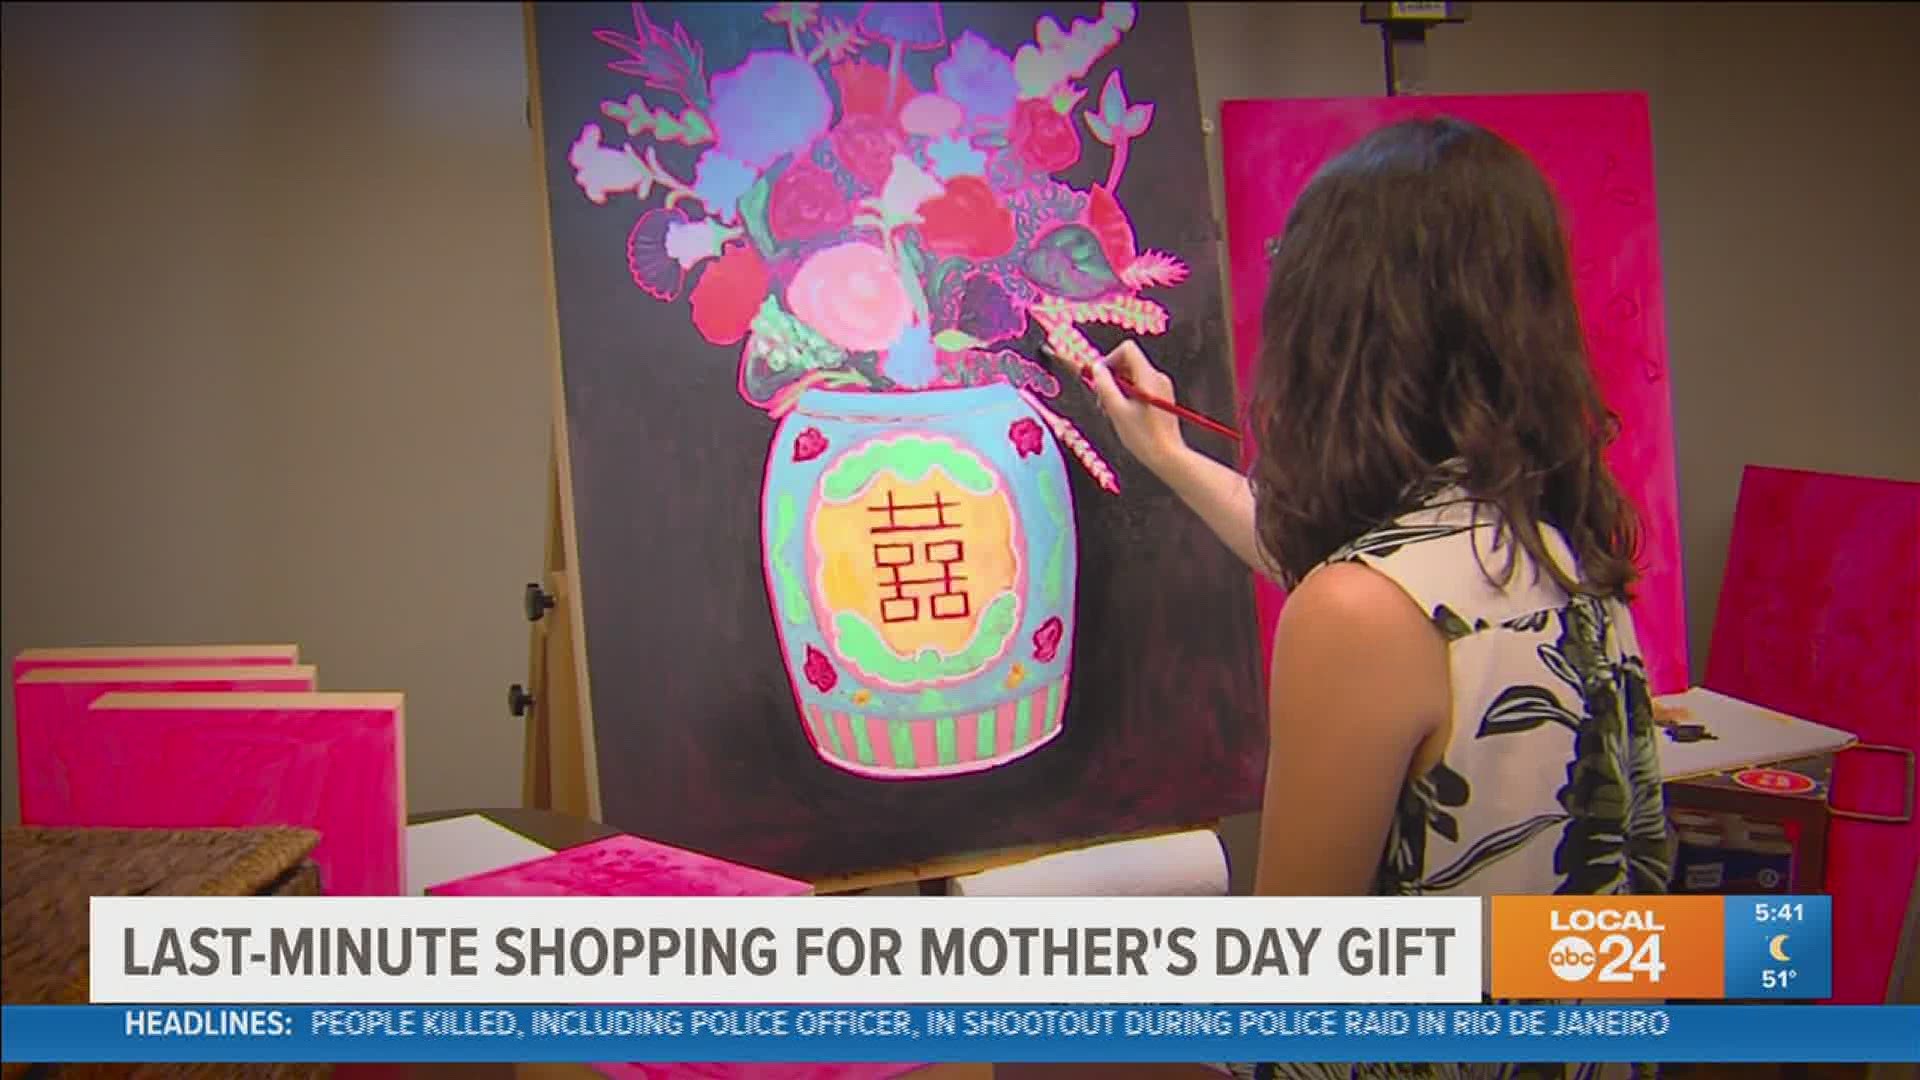 Don't forget mom this mother's day weekend! A pop-up shop is making it easy to get mom something special while supporting local